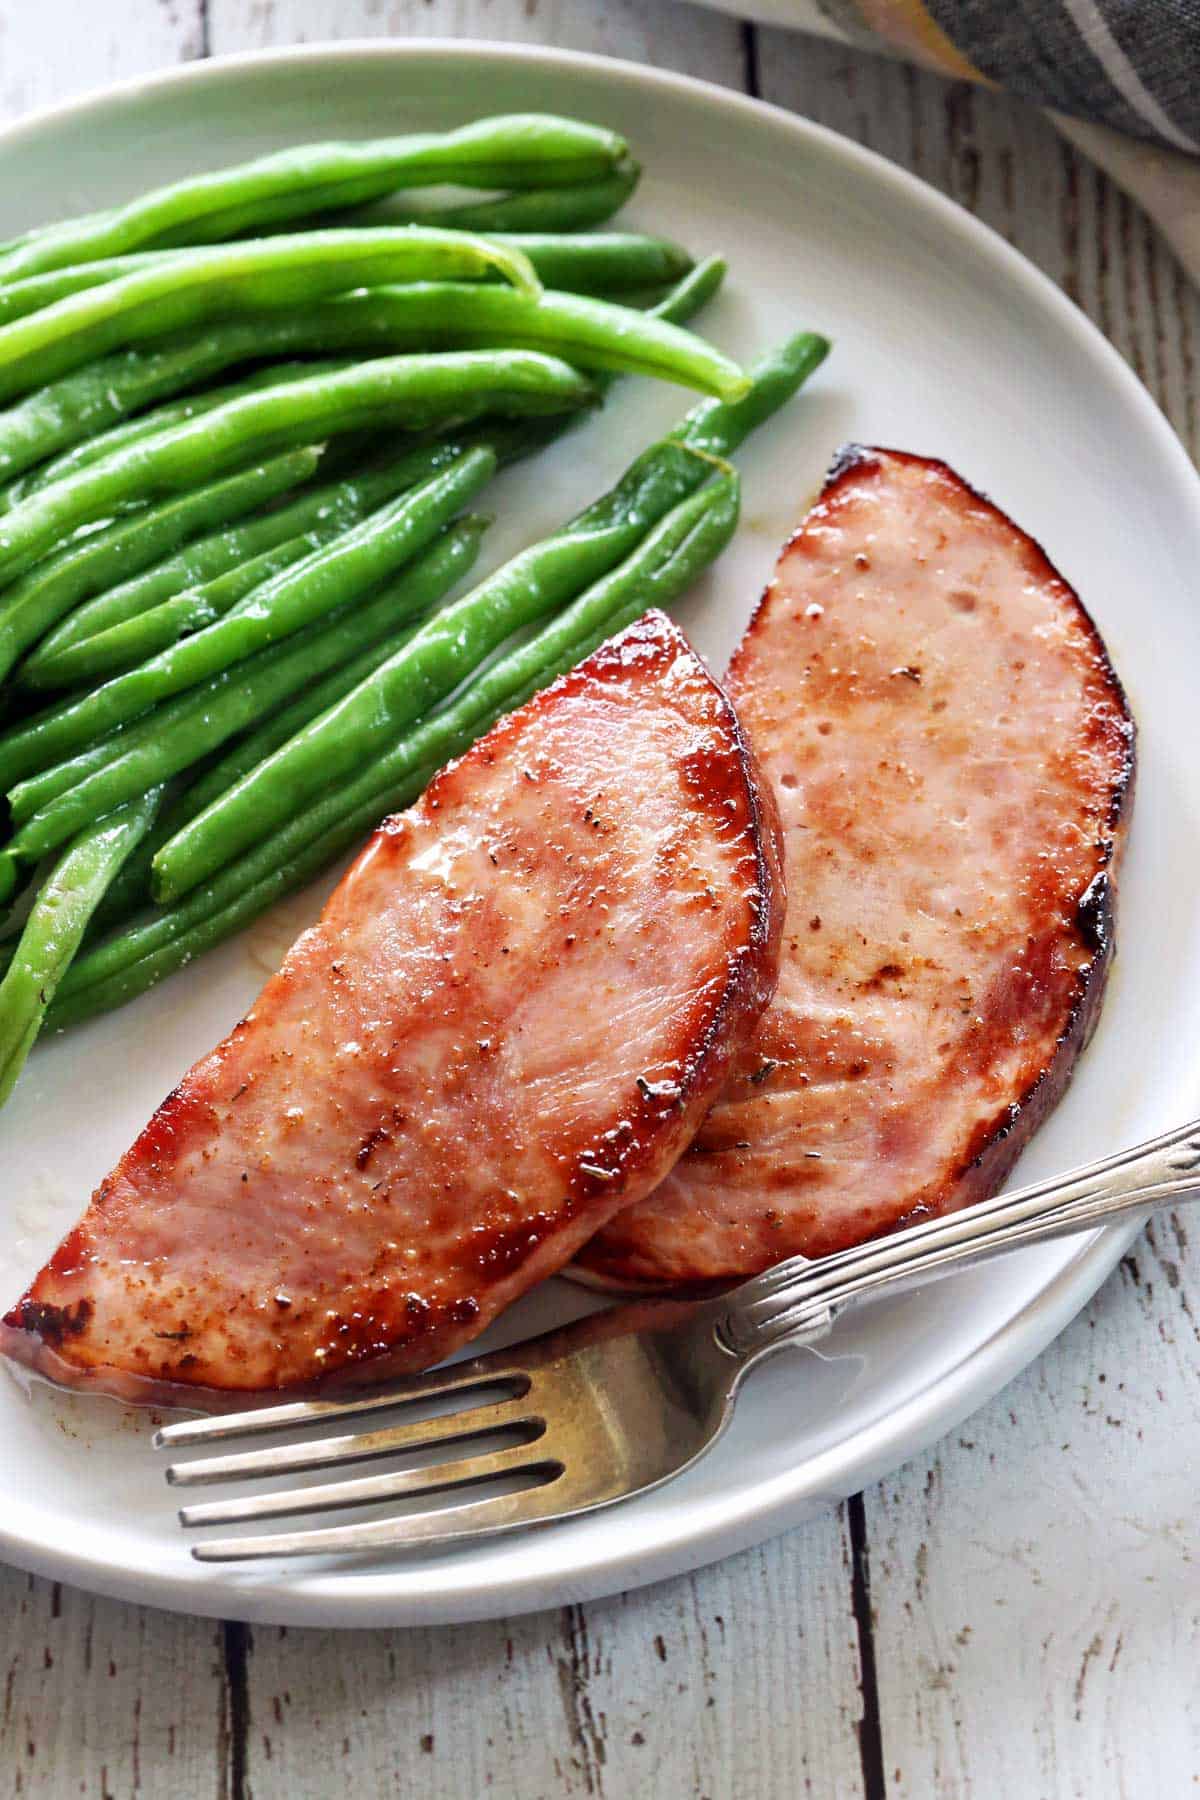 Ham steak served on a white plate with a fork and a side of green beans.  